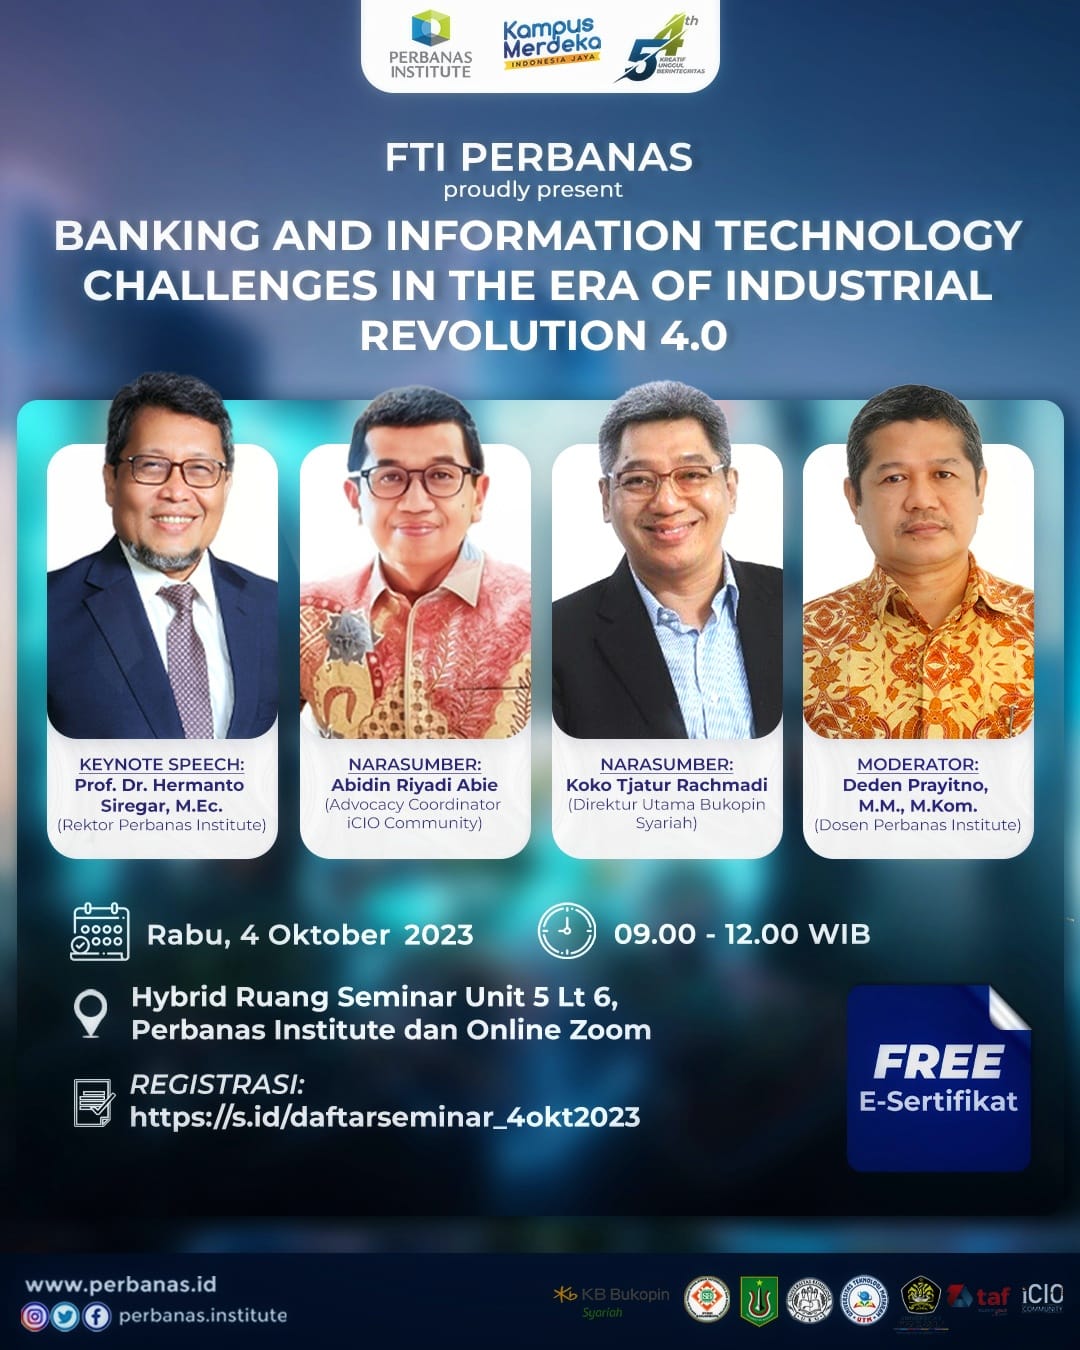 BANKING AND INFORMATION TECHNOLOGY CHALLENGES IN THE ERA OF INDUSTRIAL REVOLUTION 4.0